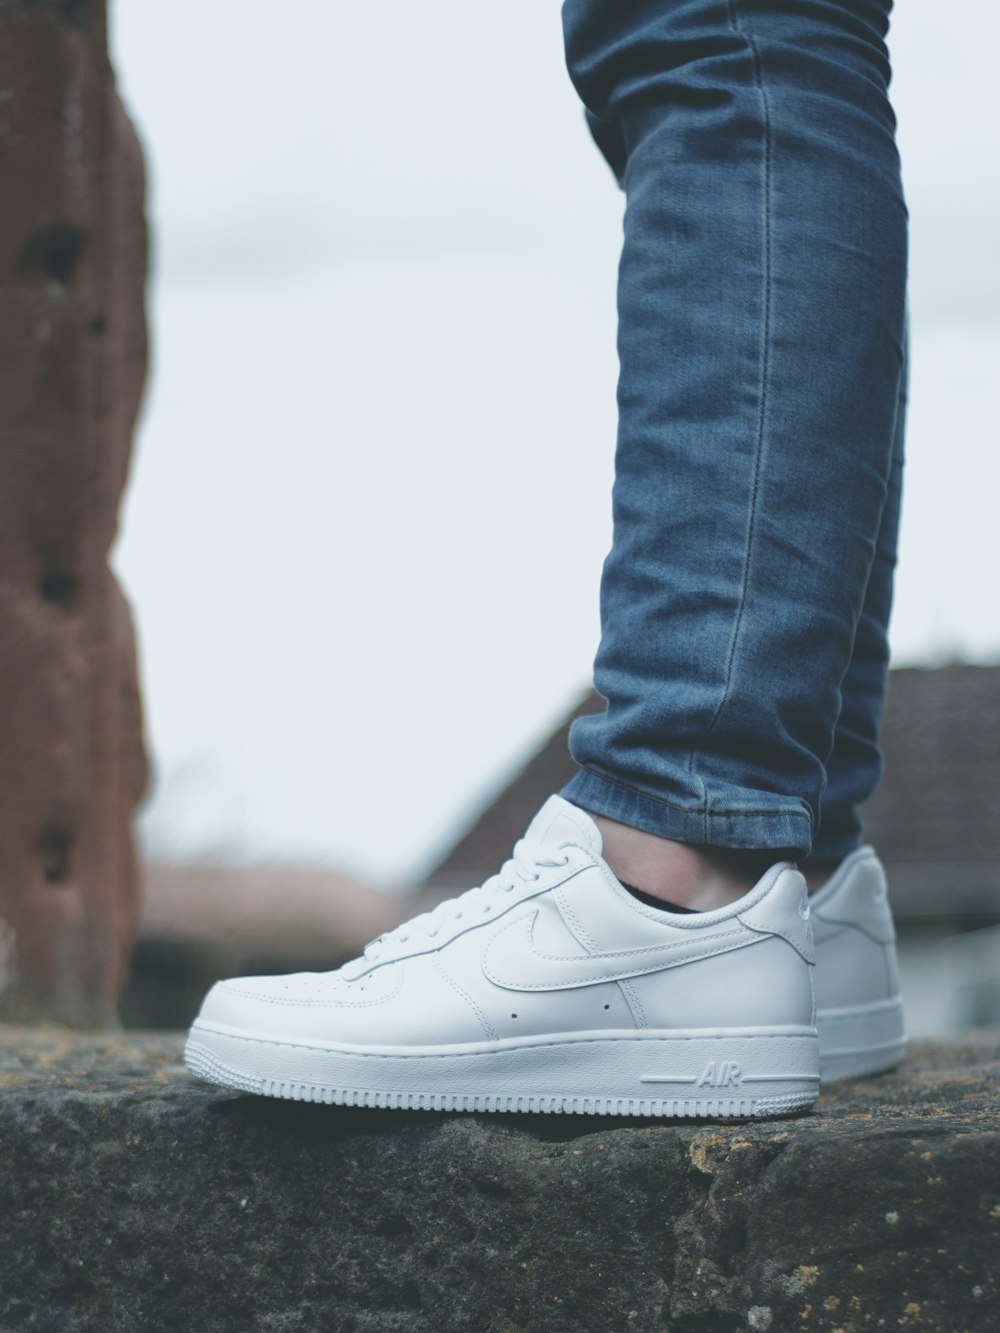 person in blue denim jeans wearing gray and pink nike sneakers photo – Free  Germany Image on Unsplash